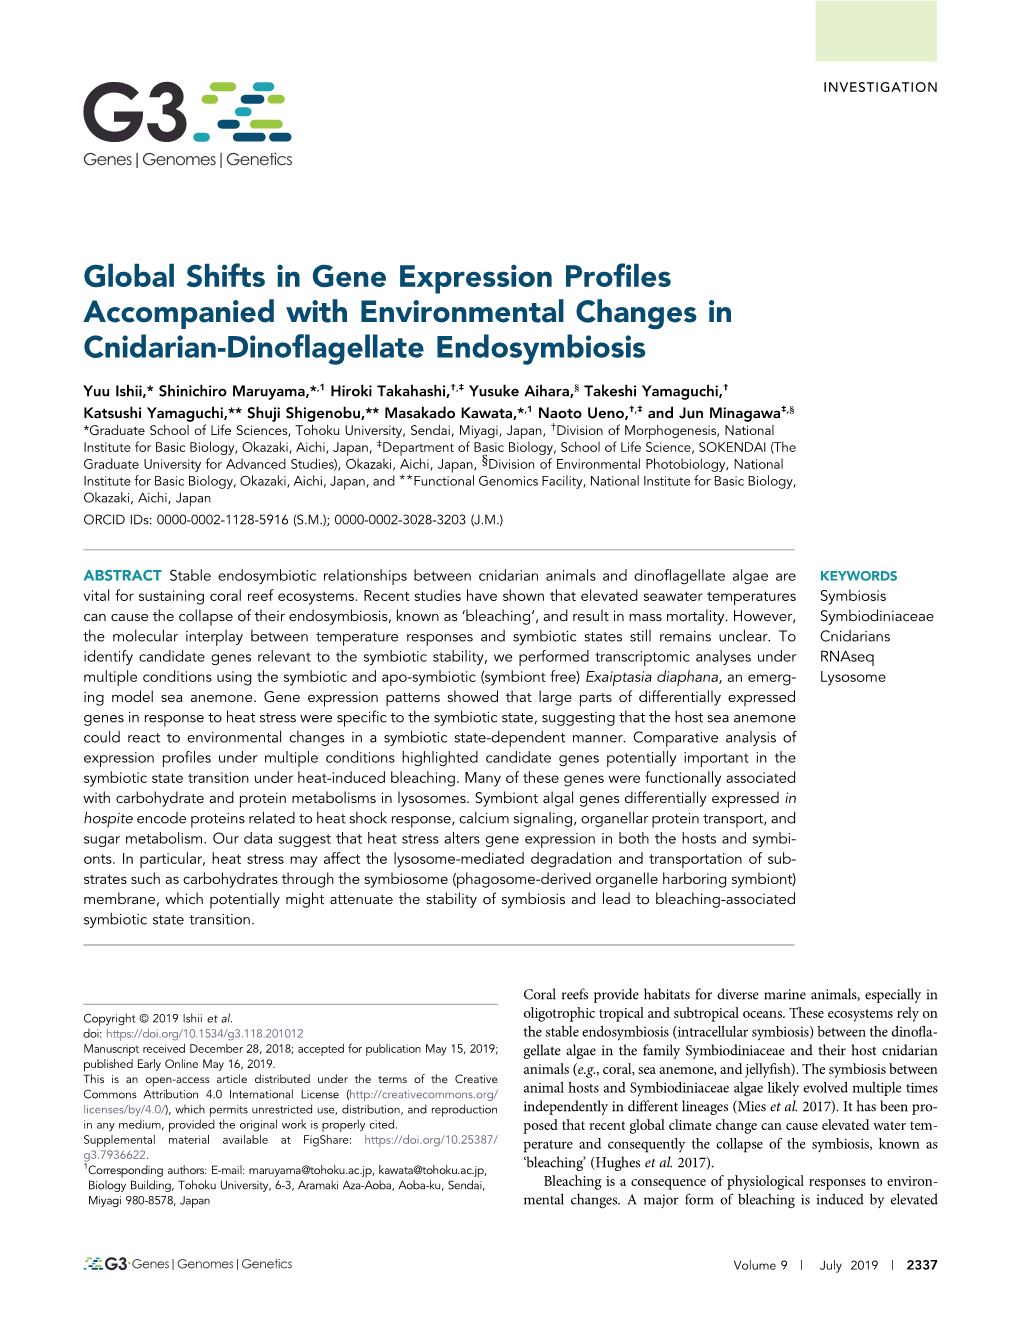 Global Shifts in Gene Expression Profiles Accompanied with Environmental Changes in Cnidarian-Dinoflagellate Endosymbiosis